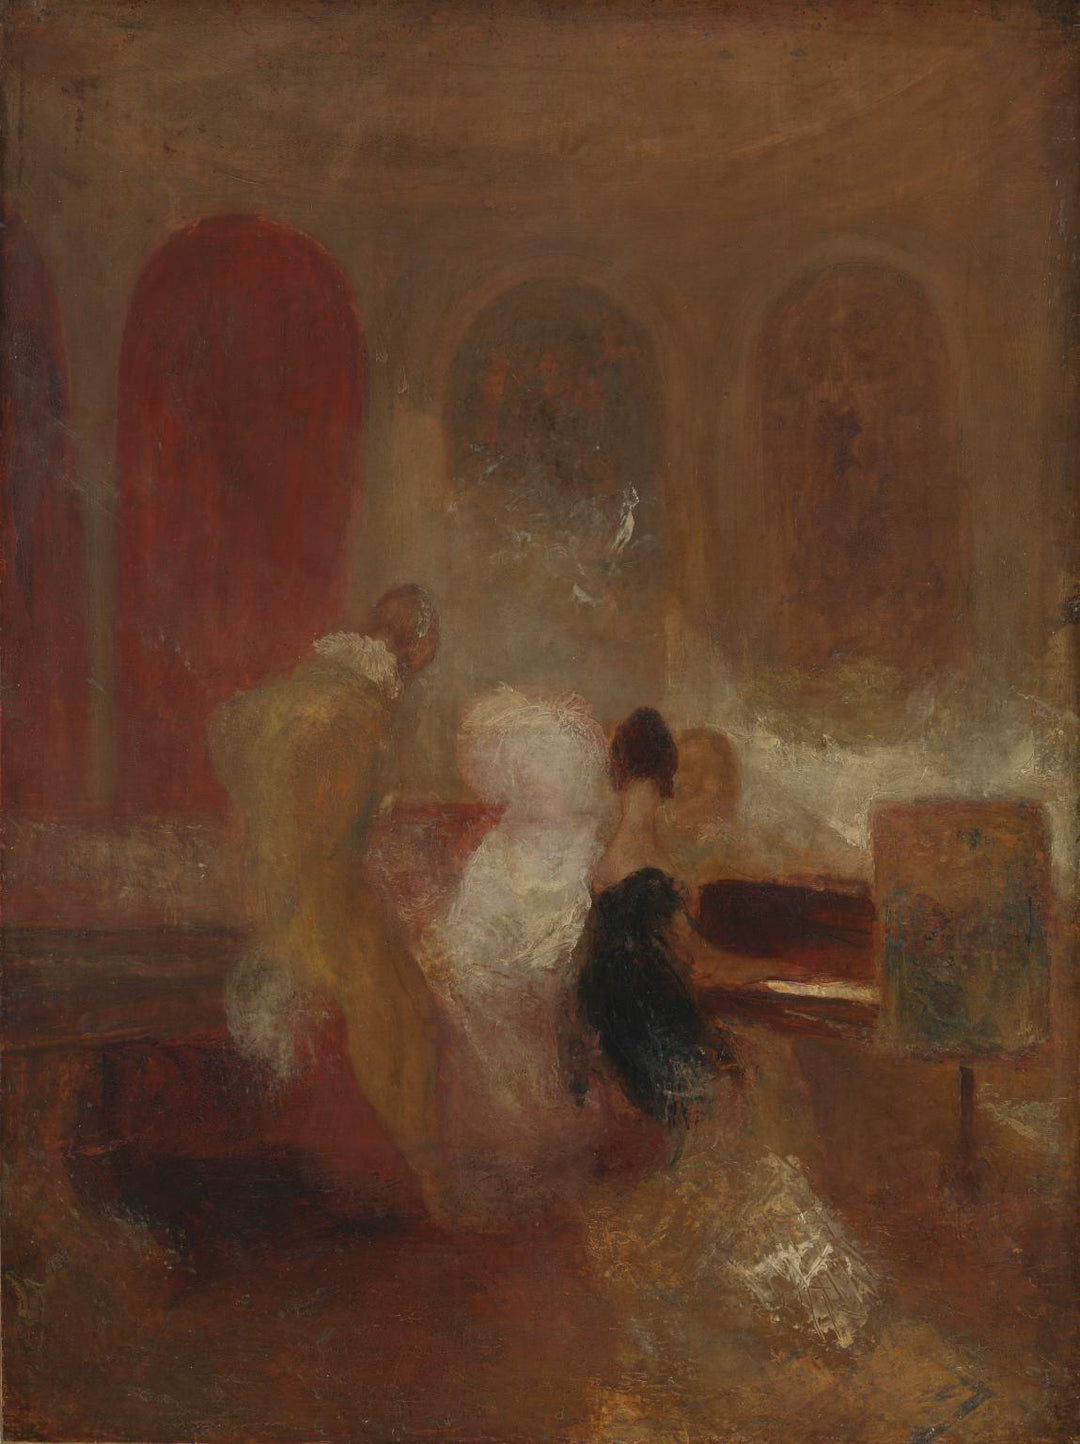 Music Party, East Cowes Castle by J. M. W. Turner. Seascape painting, Turner artworks, Turner canvas art, J. M. W. Turner oil painting, Turner reproduction for sale. Landscape paintings, Turner art decor, Turner oil painting on canvas, Blue Surf Art